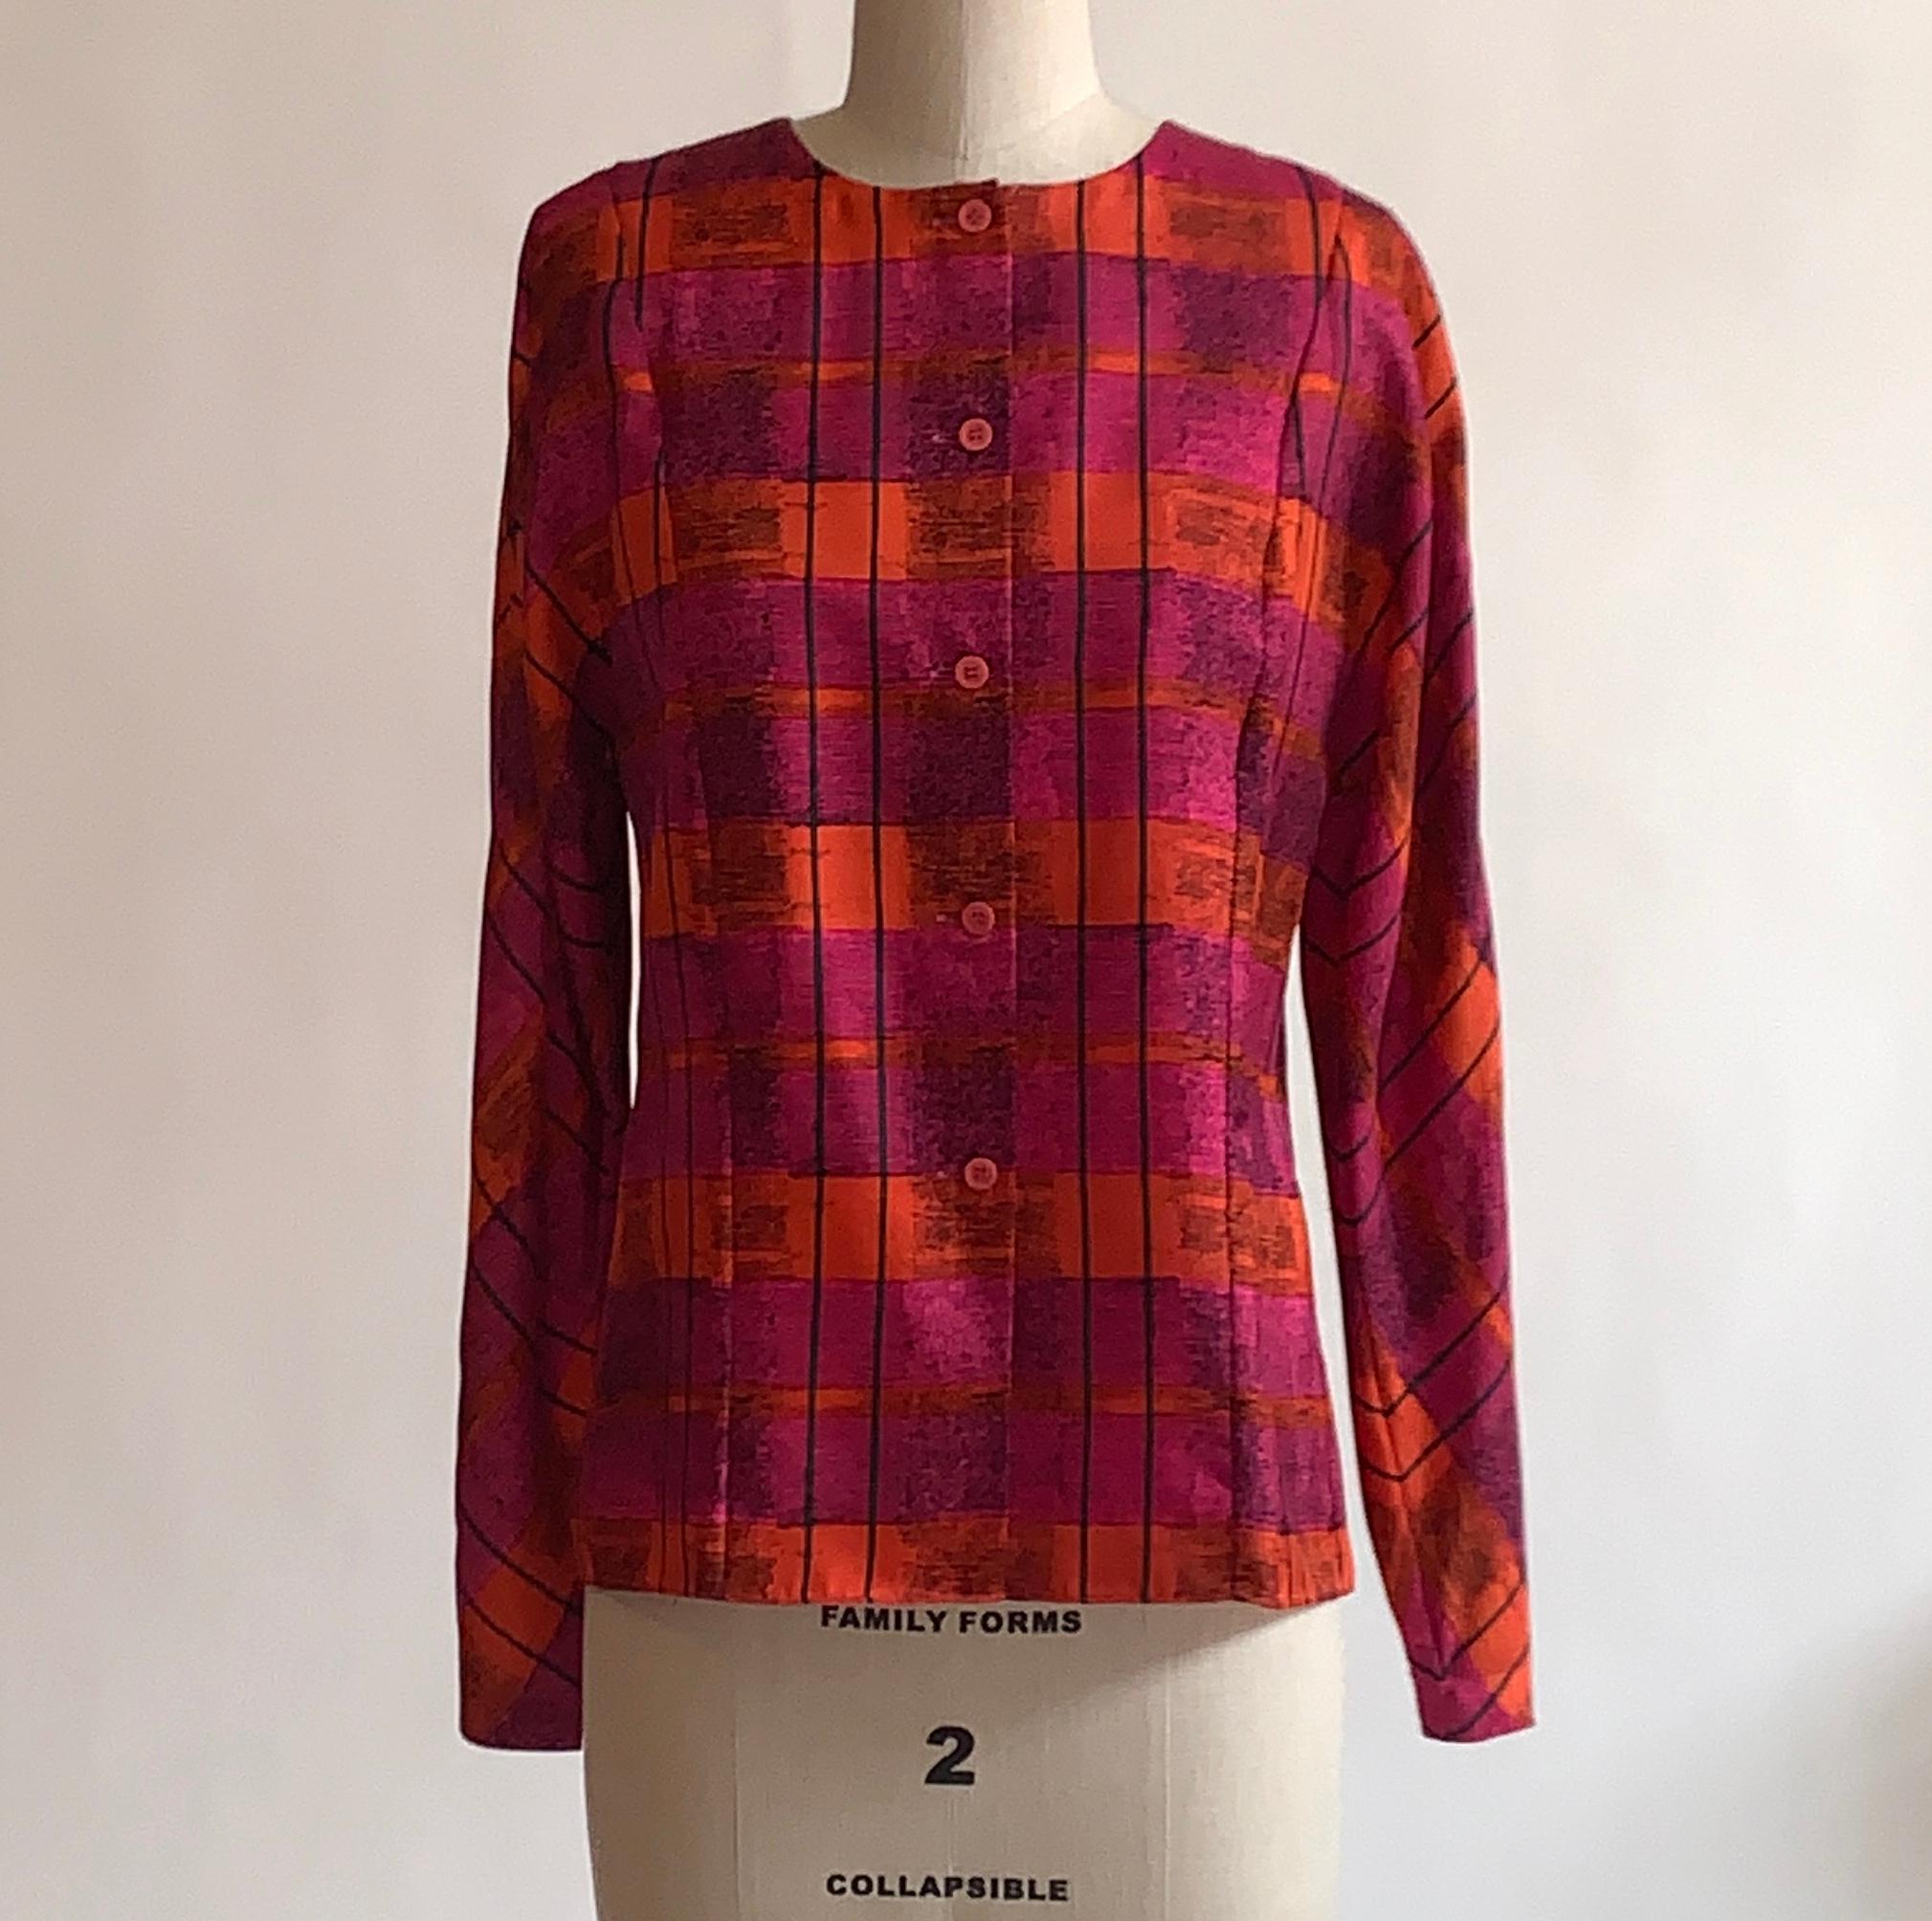 Sprouse by Stephen Sprouse pink and orange check silk long sleeve blouse with round neck, button front, and long sleeves. Black 